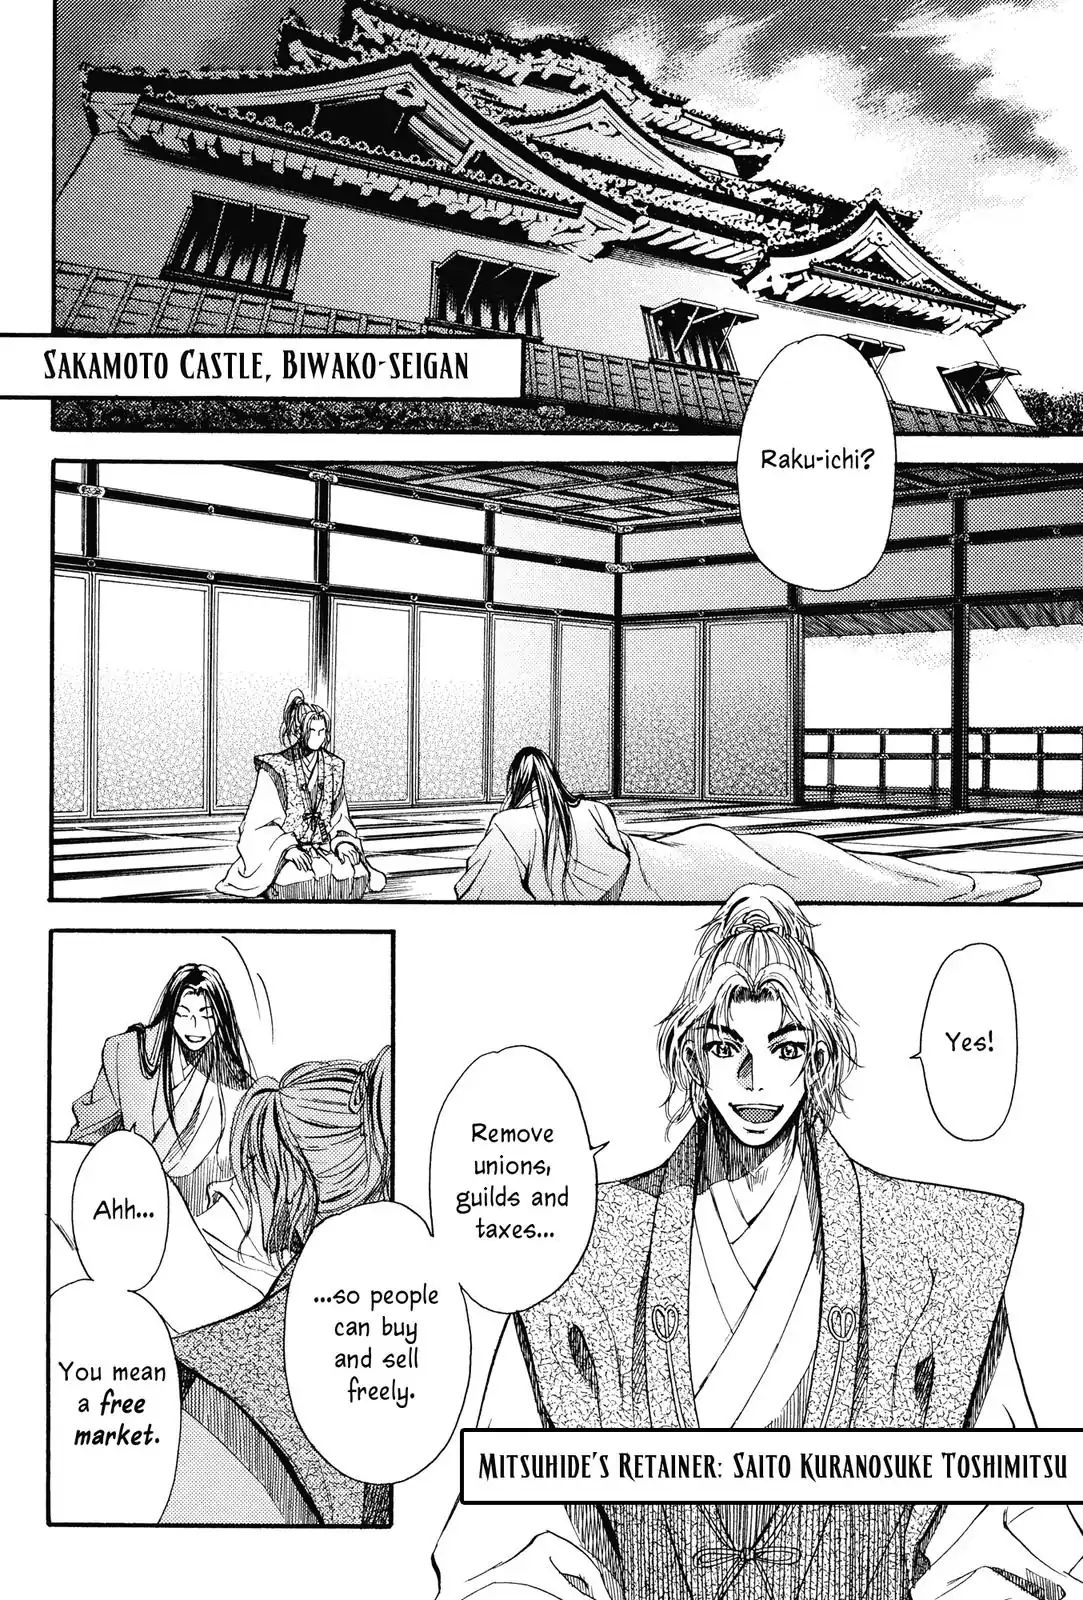 King's Moon - The Life Of Akechi Mitsuhide - Page 2